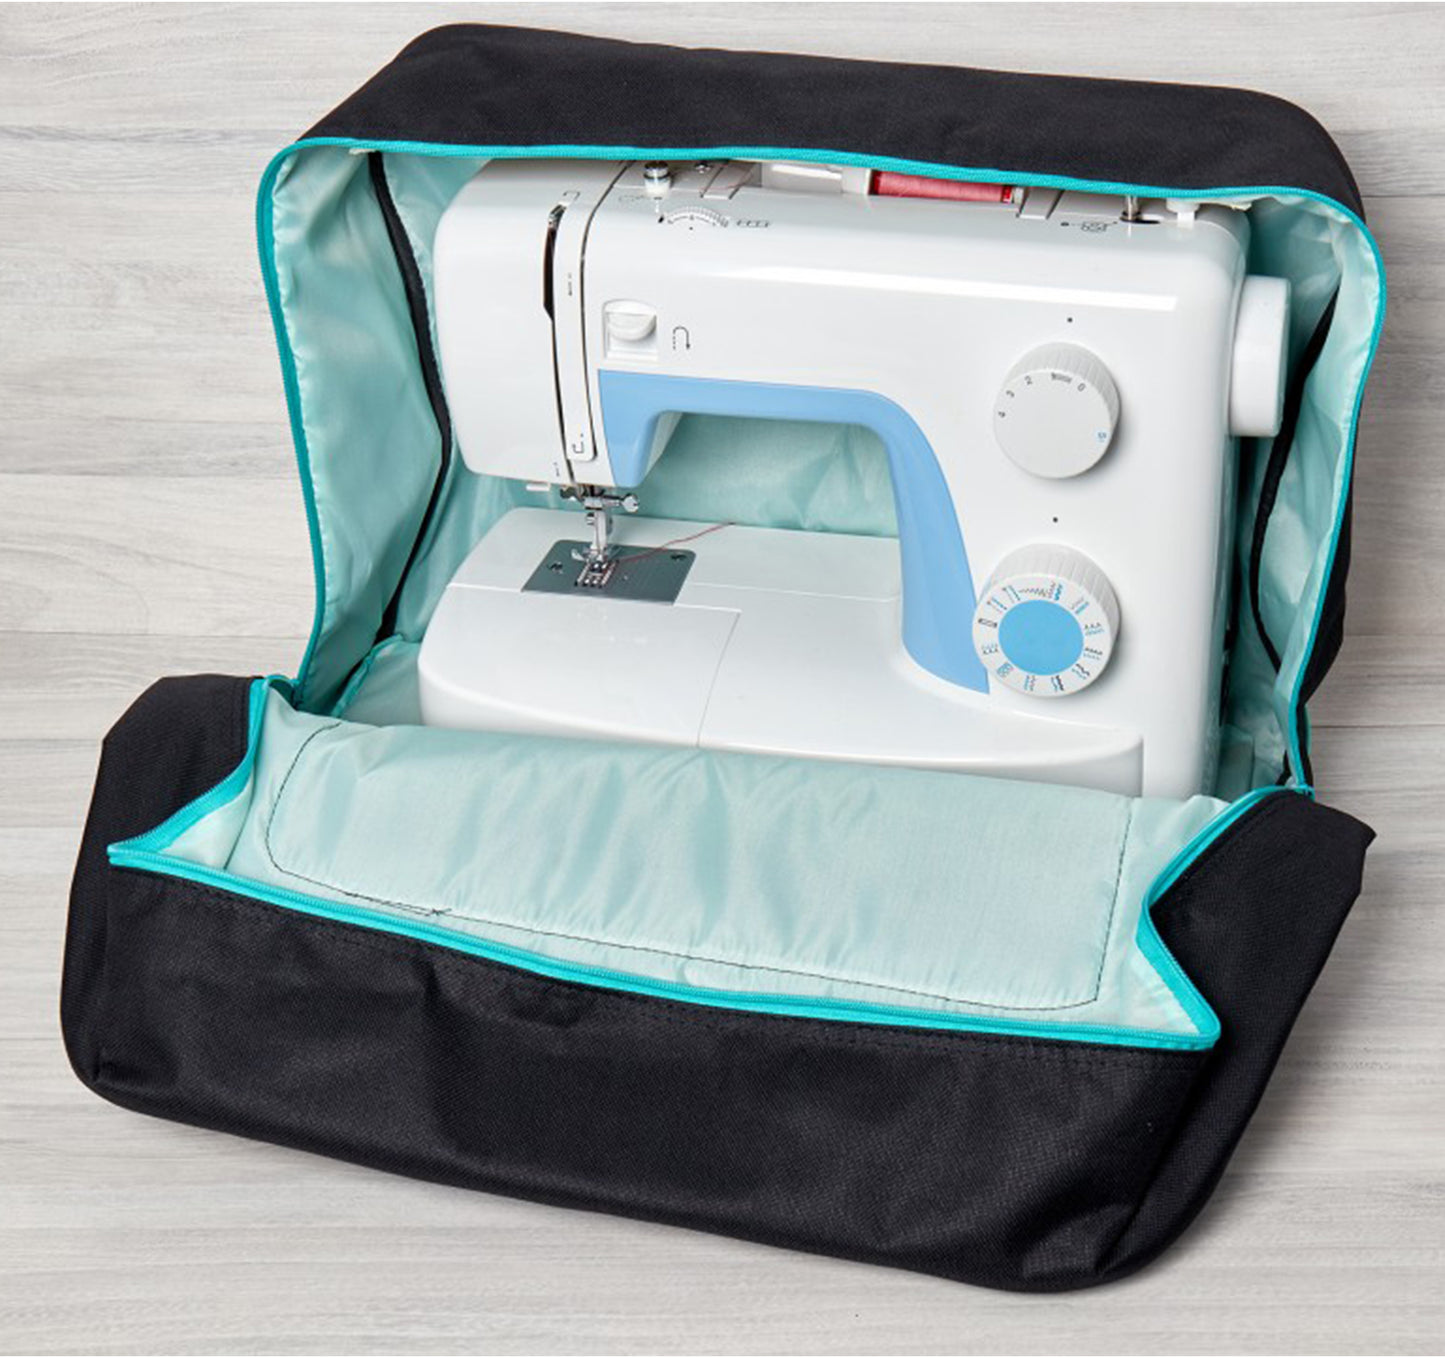 Sewing Machine Bag: Black and Turquoise